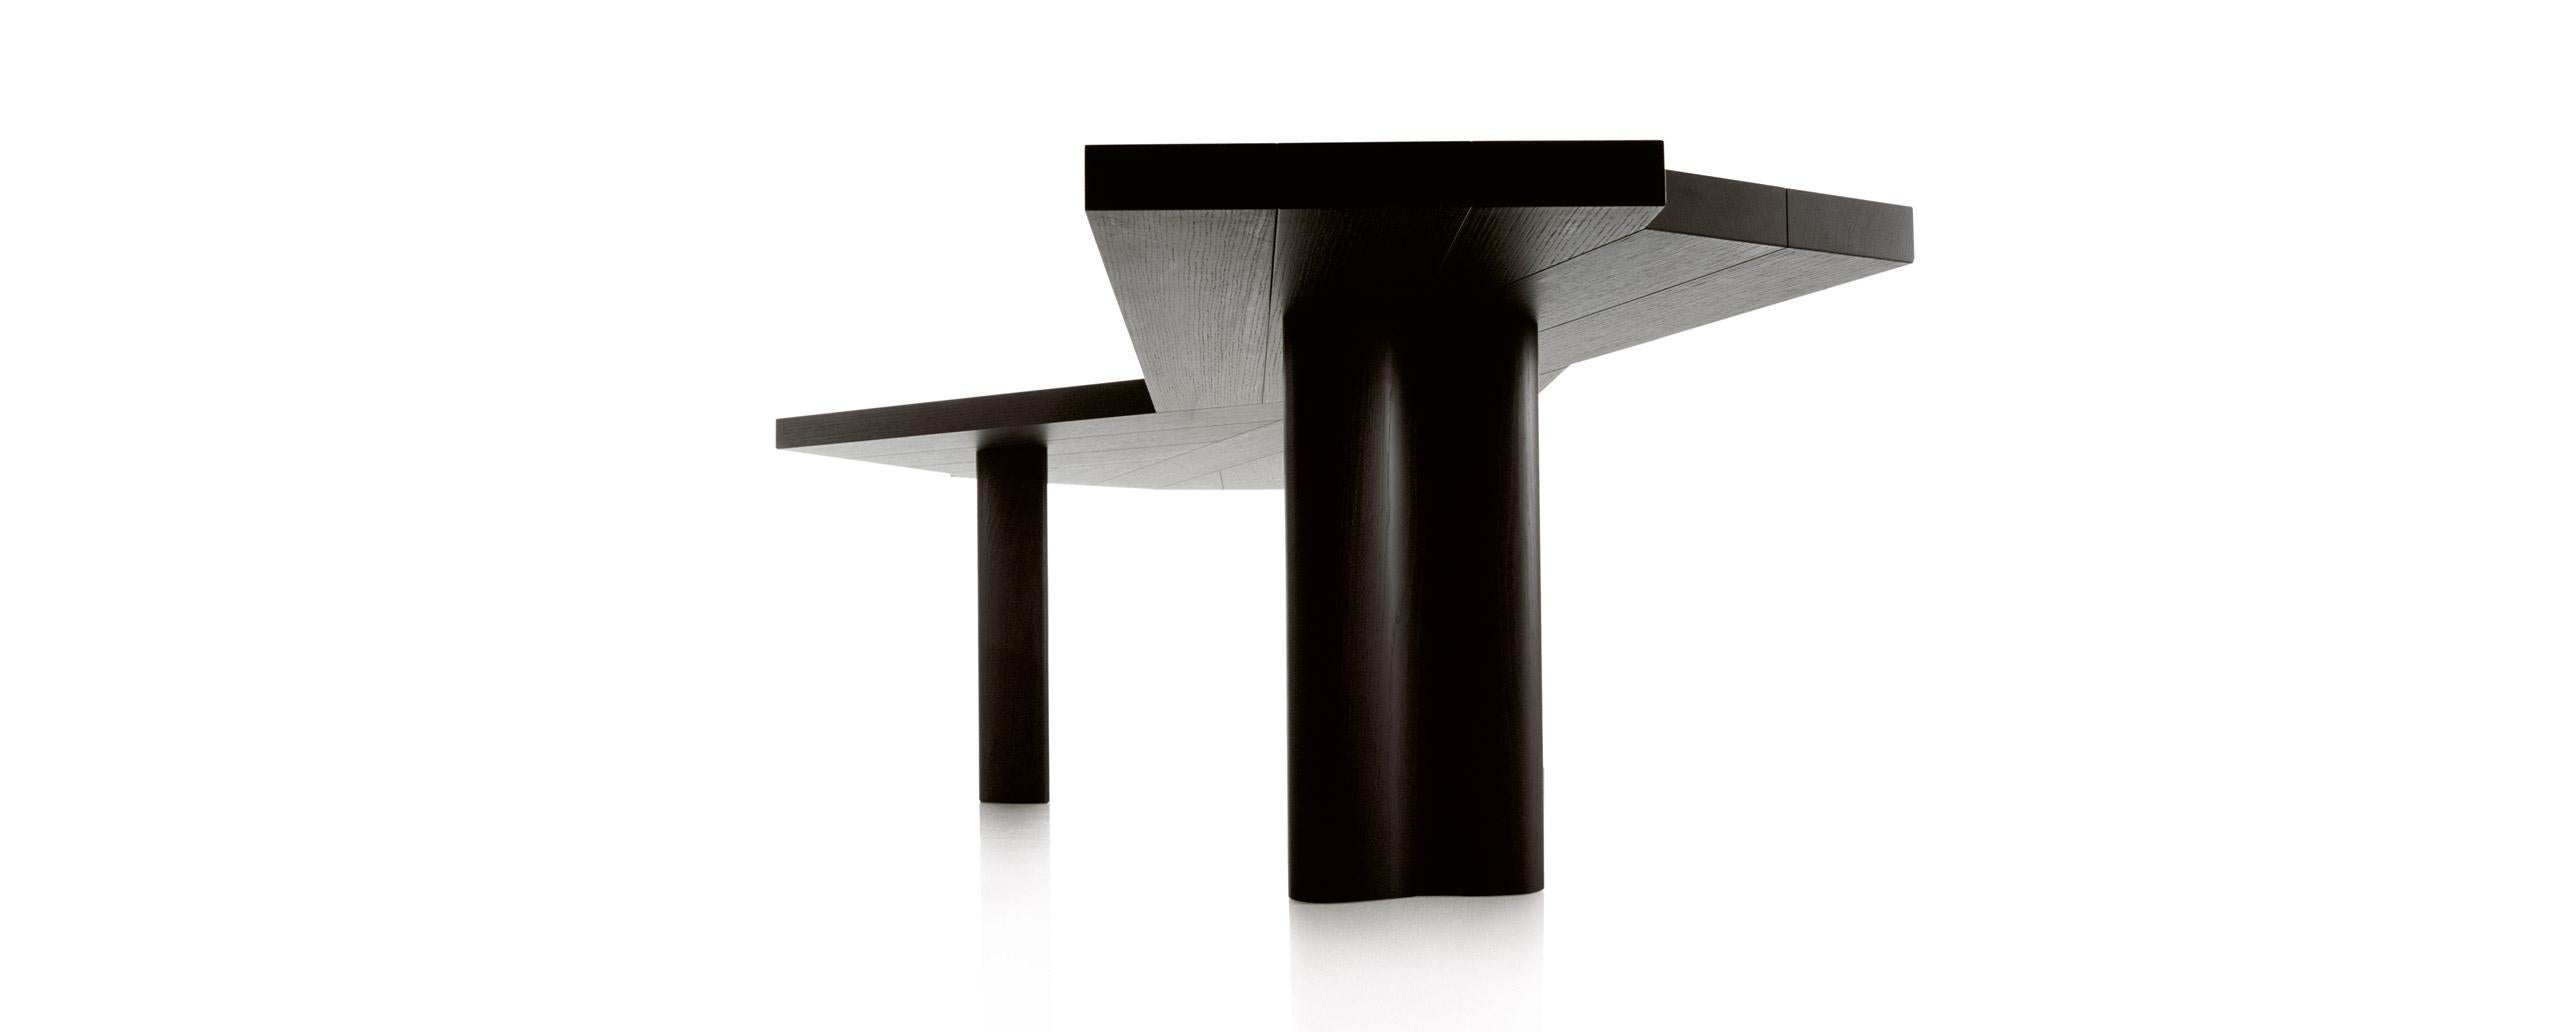 Italian Charlotte Perriand Ventaglio Wood Stained Black Table by Cassina For Sale